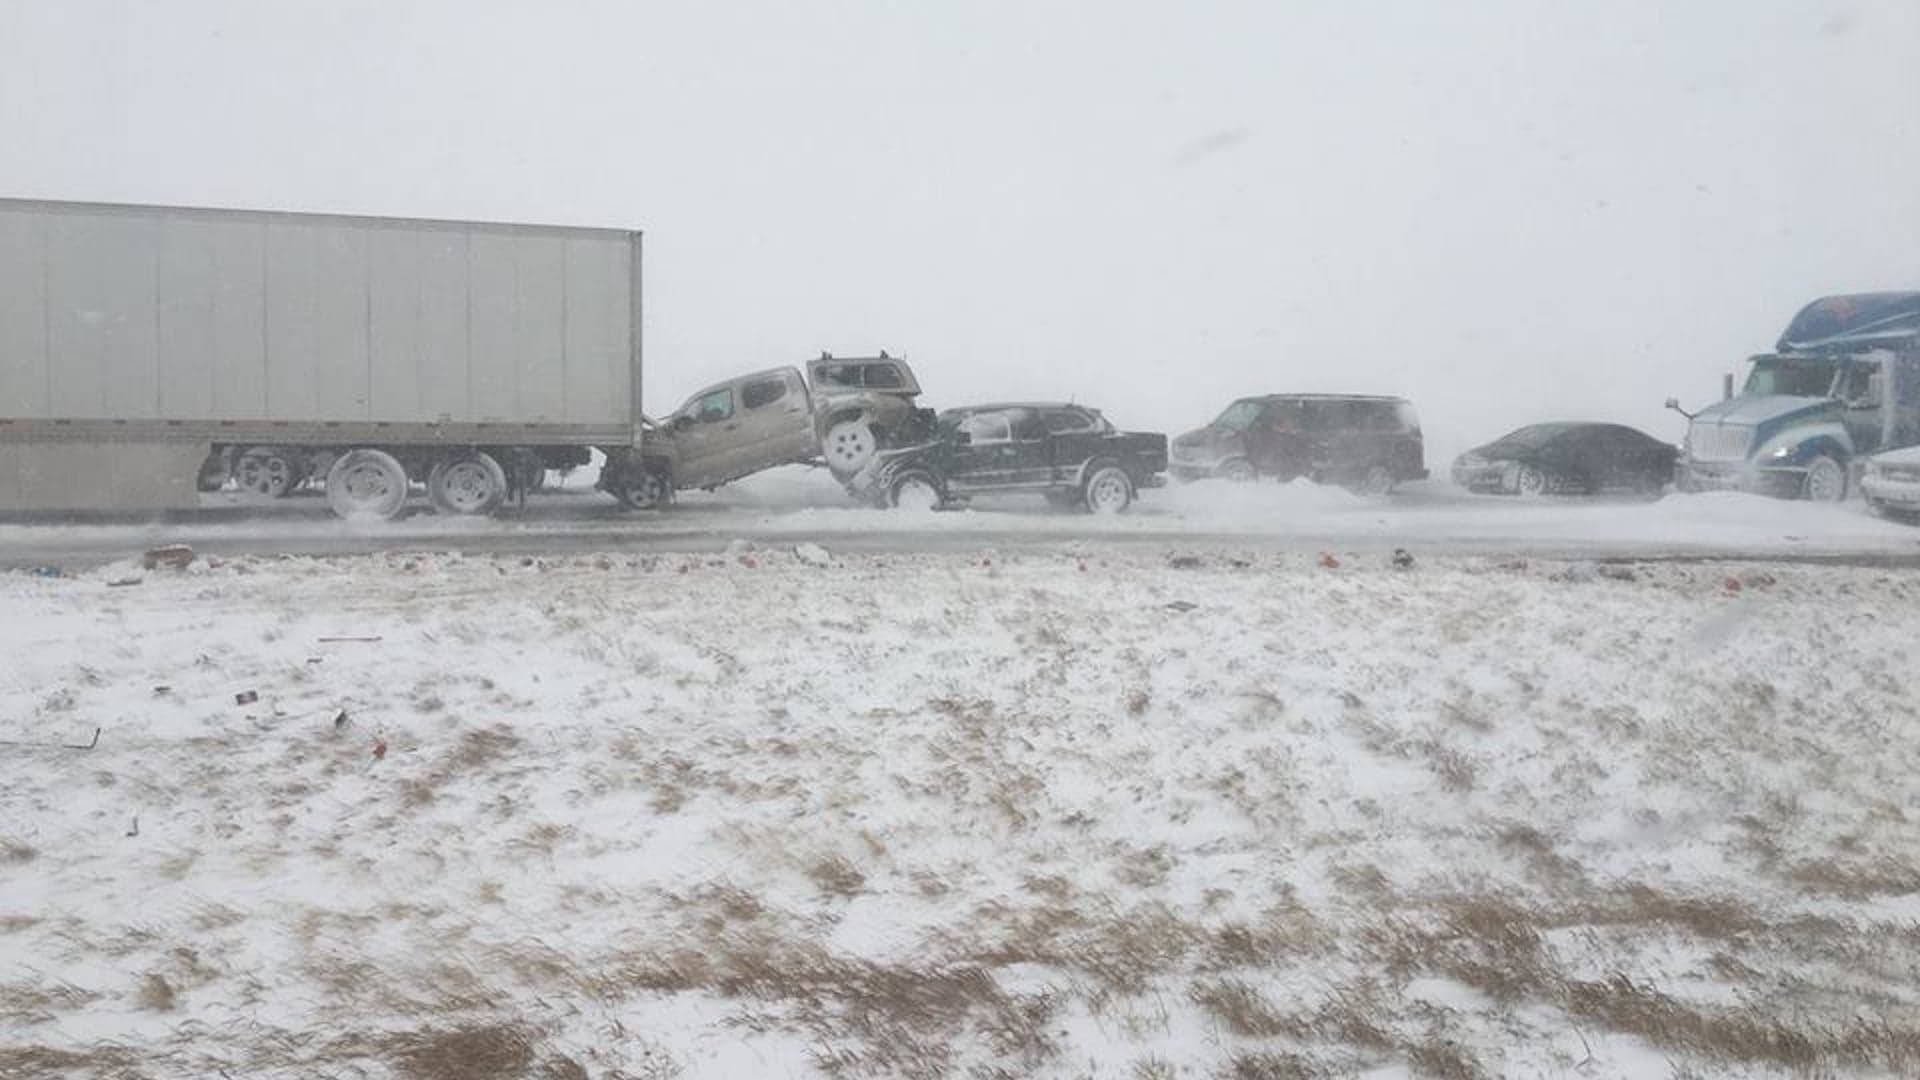 ‘Bomb Cyclone’ Blizzard Causes Disastrous 100-Car Pileup in Colorado